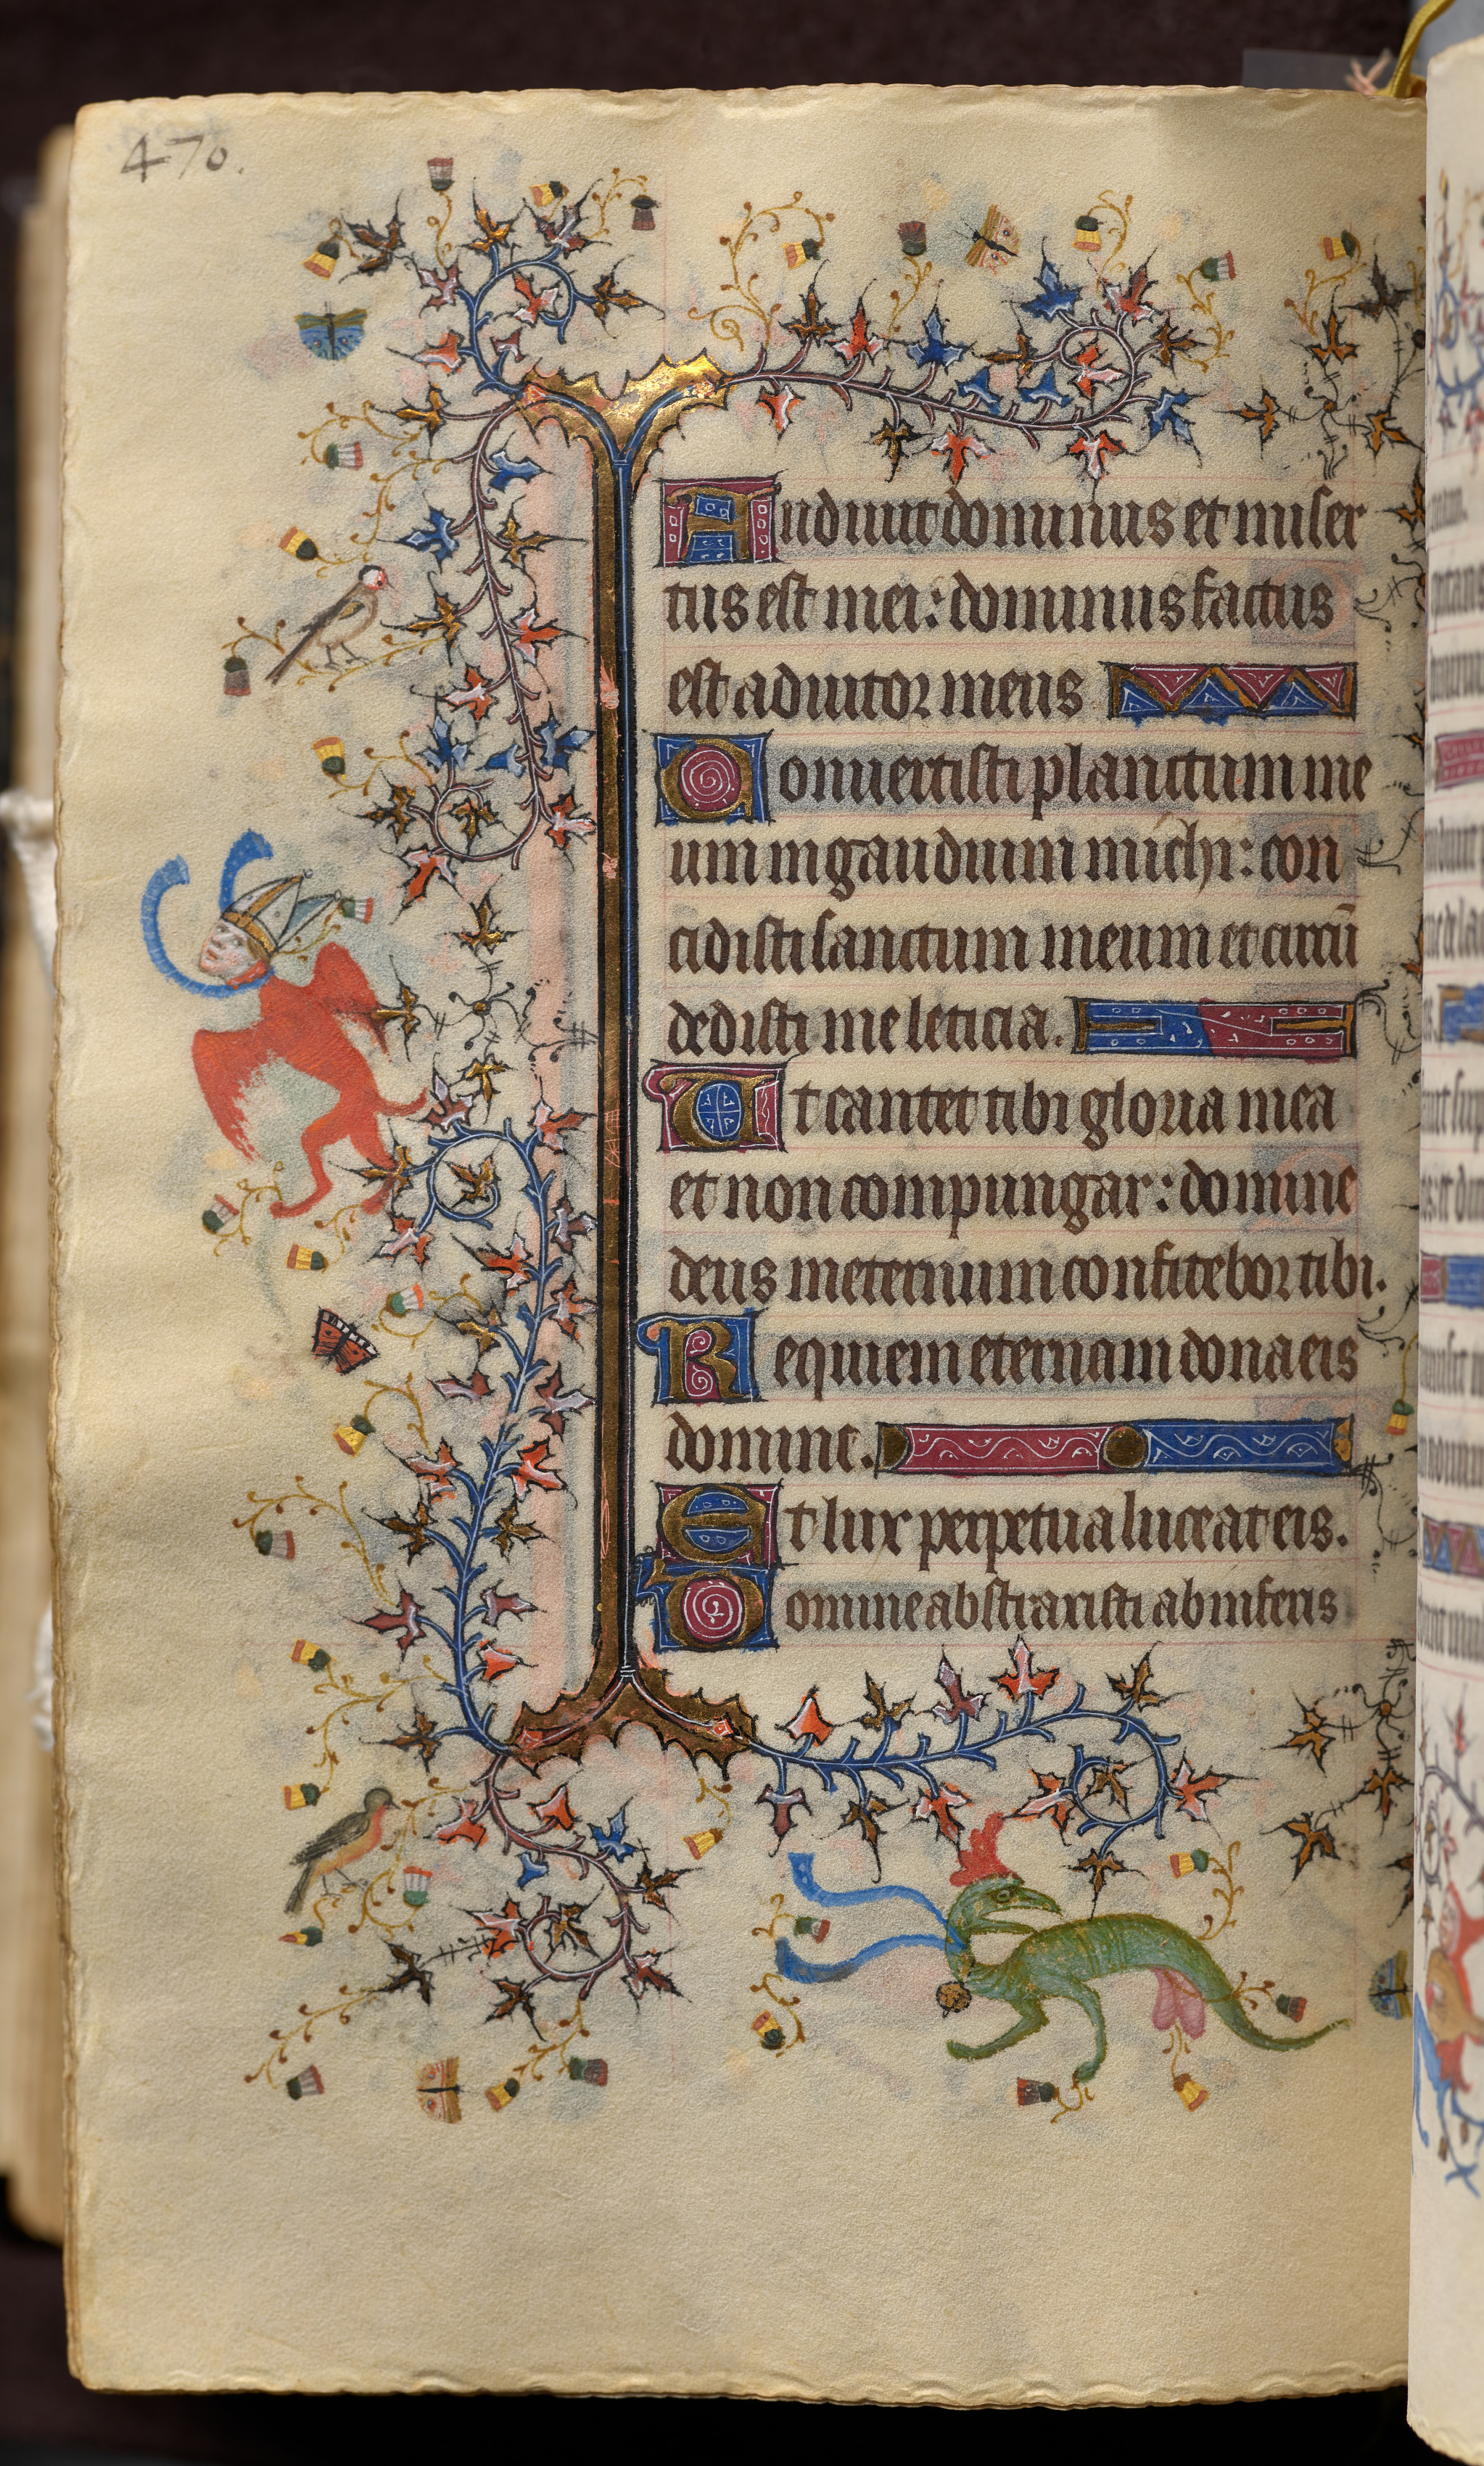 Hours of Charles the Noble, King of Navarre (1361-1425): fol. 229v, Text